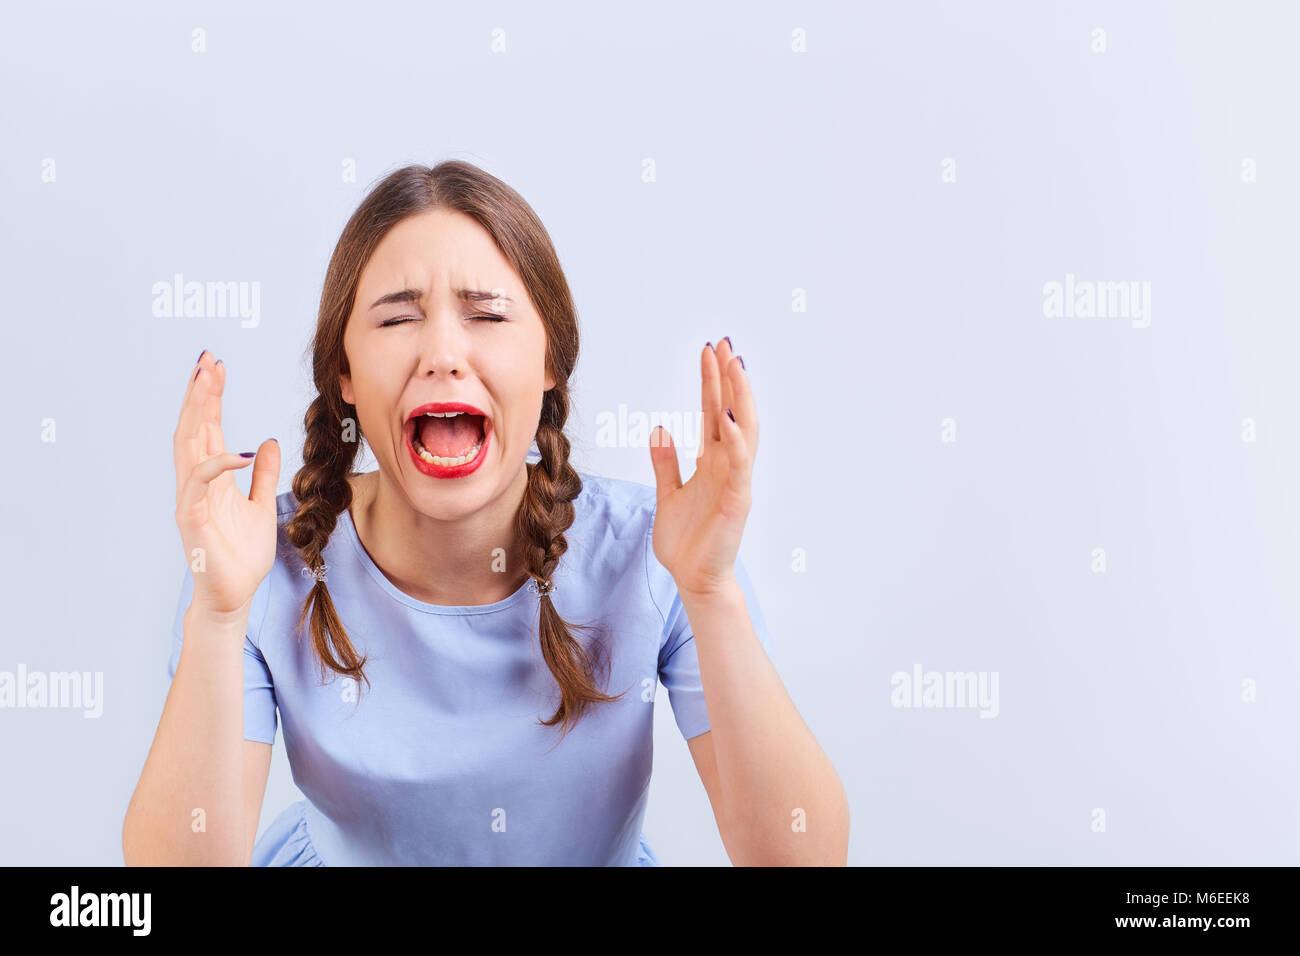 Young girl screams with emotion excited looking at gray background. Stock Photo